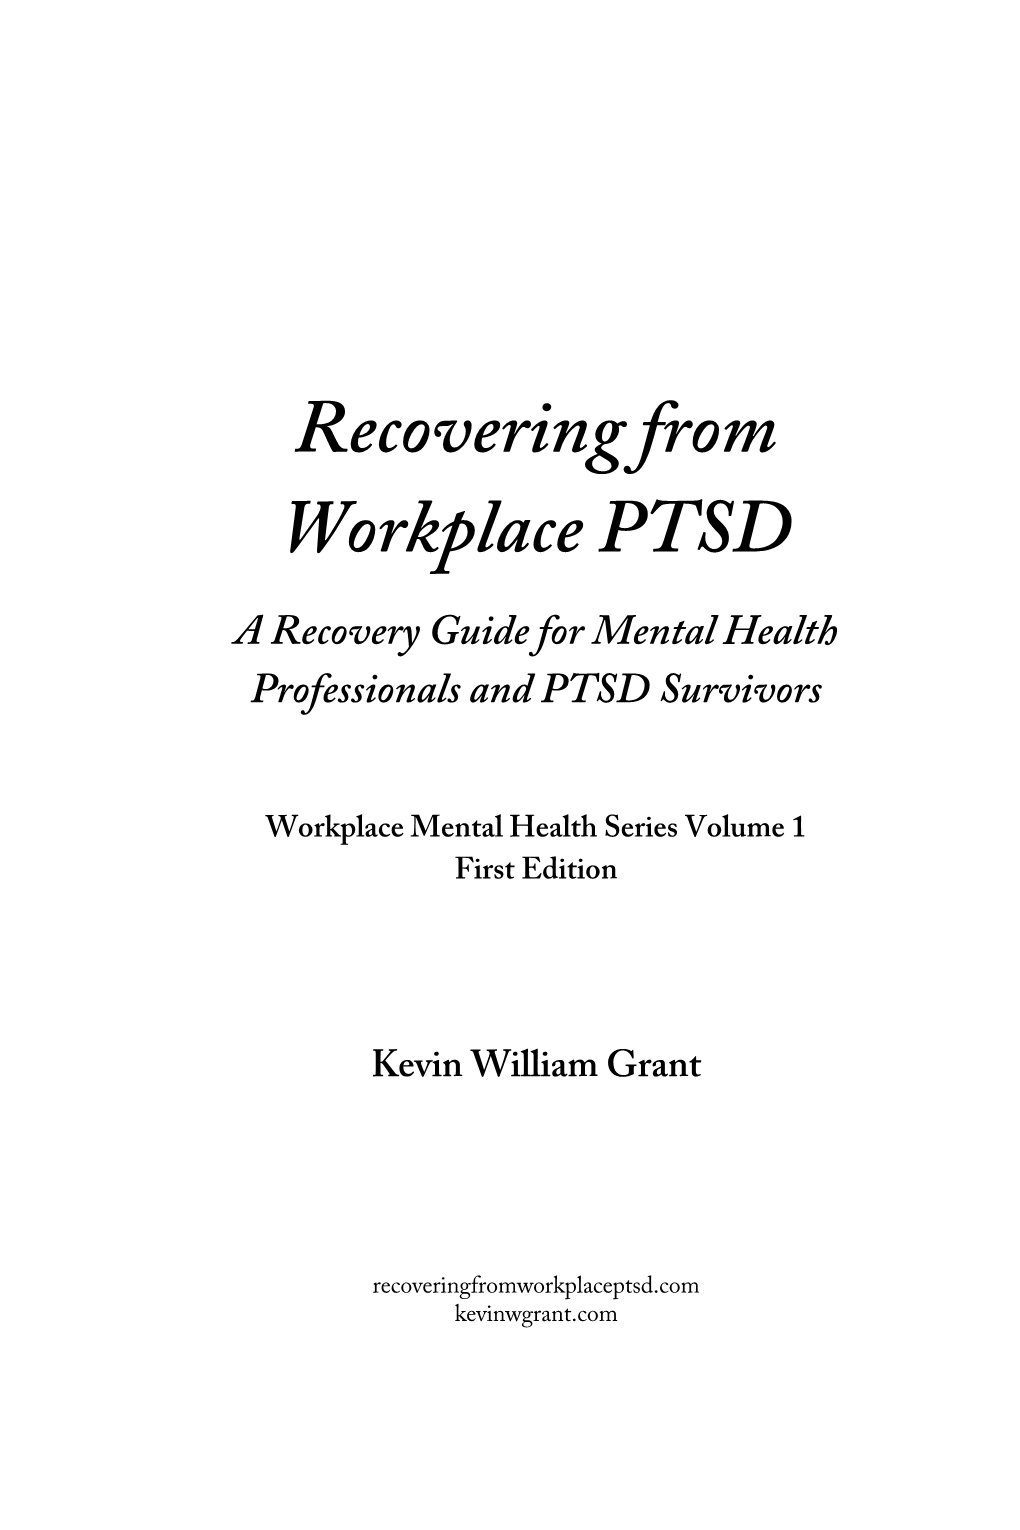 Recovering from Workplace PTSD a Recovery Guide for Mental Health Professionals and PTSD Survivors